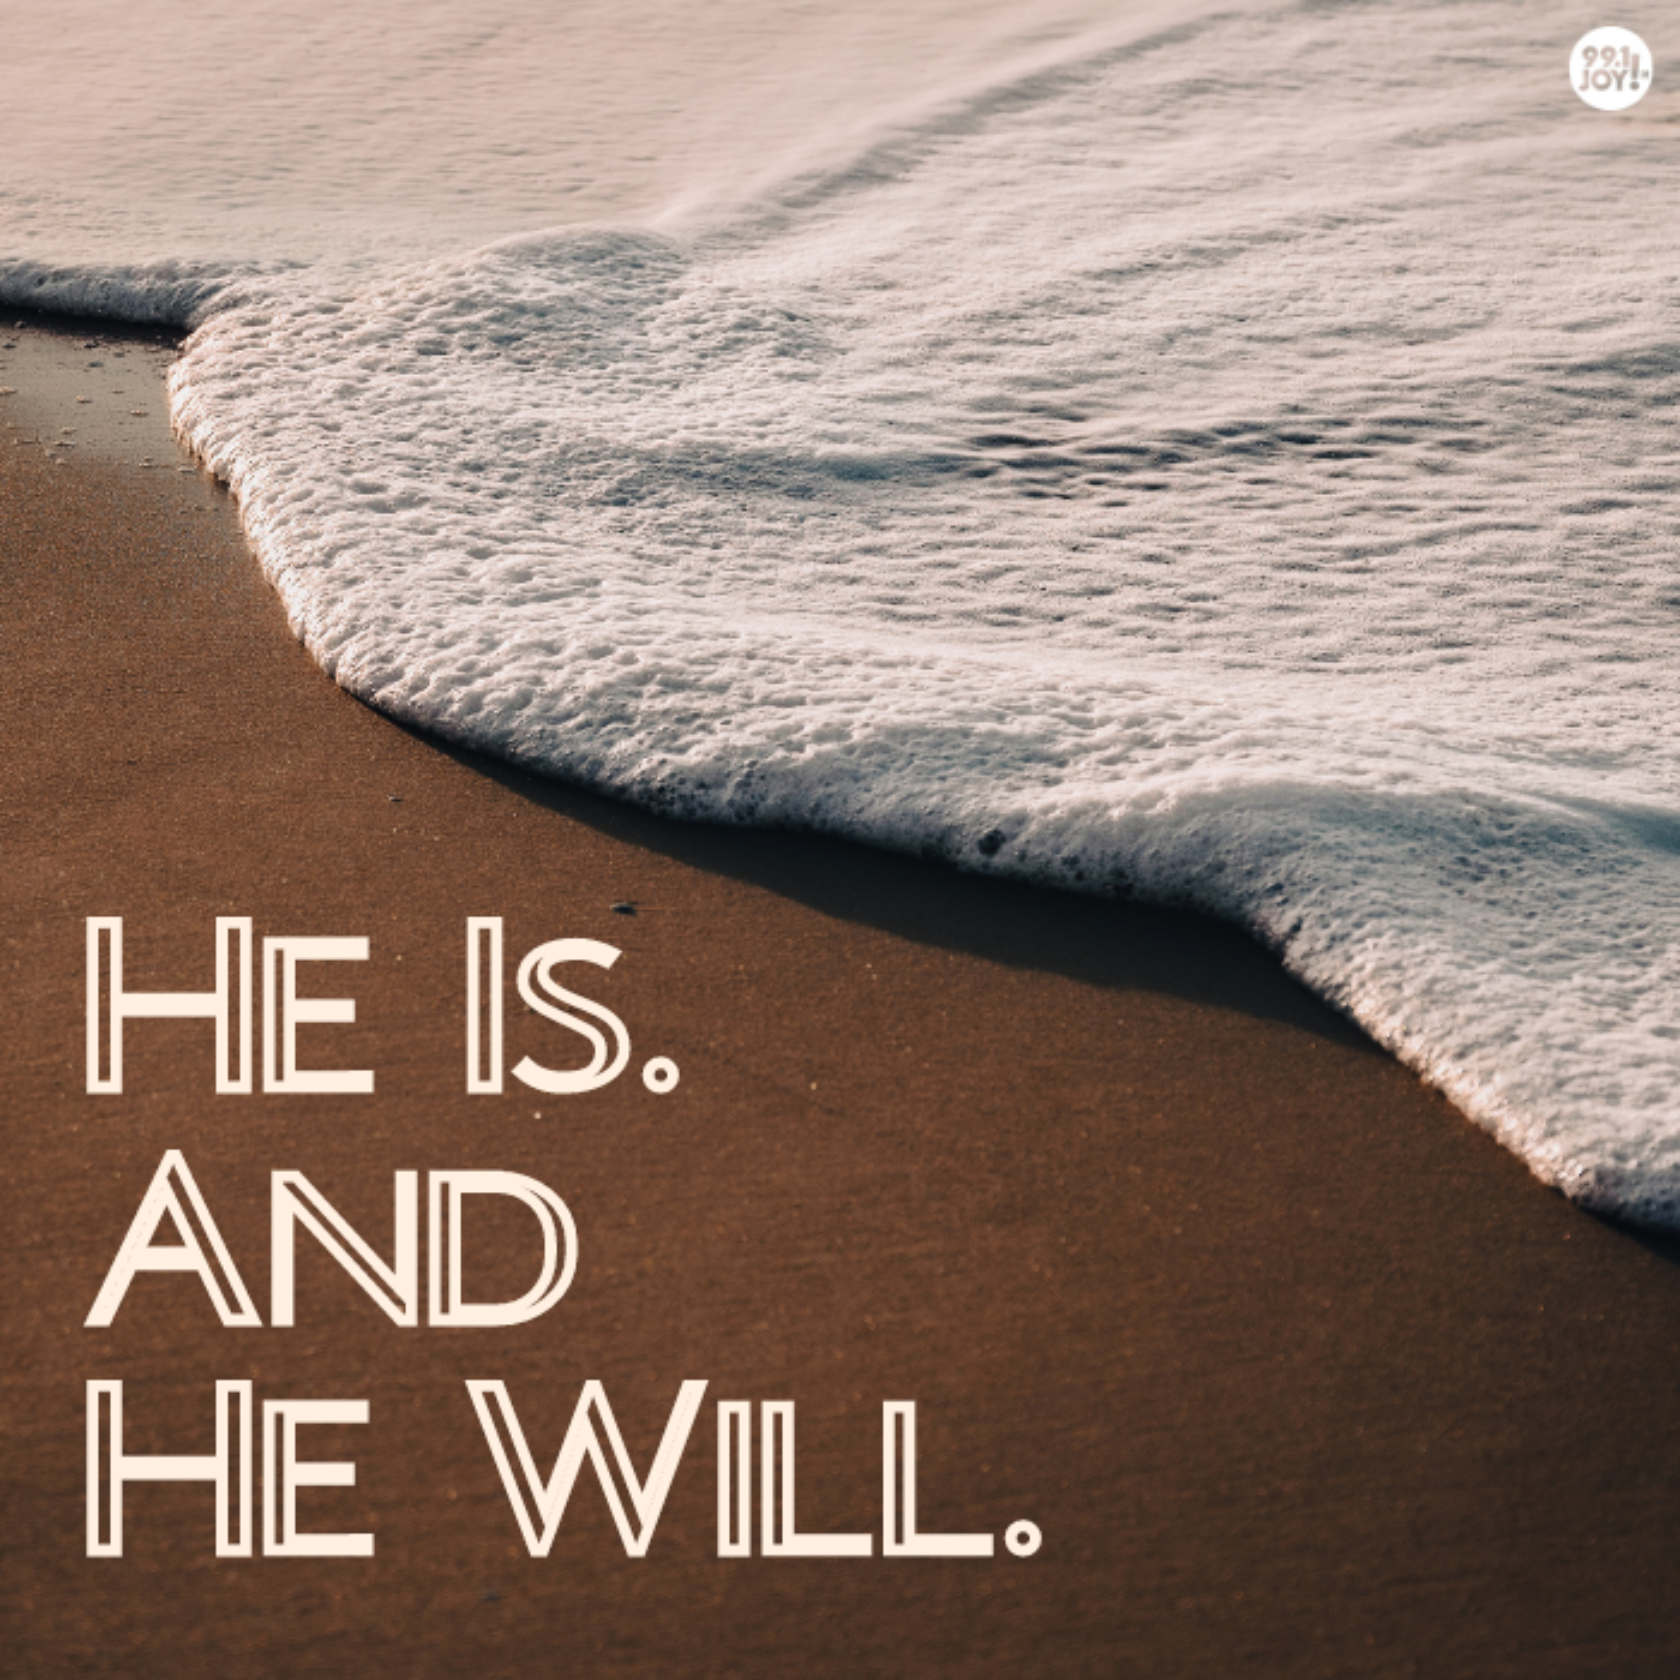 He Is. And He Will.